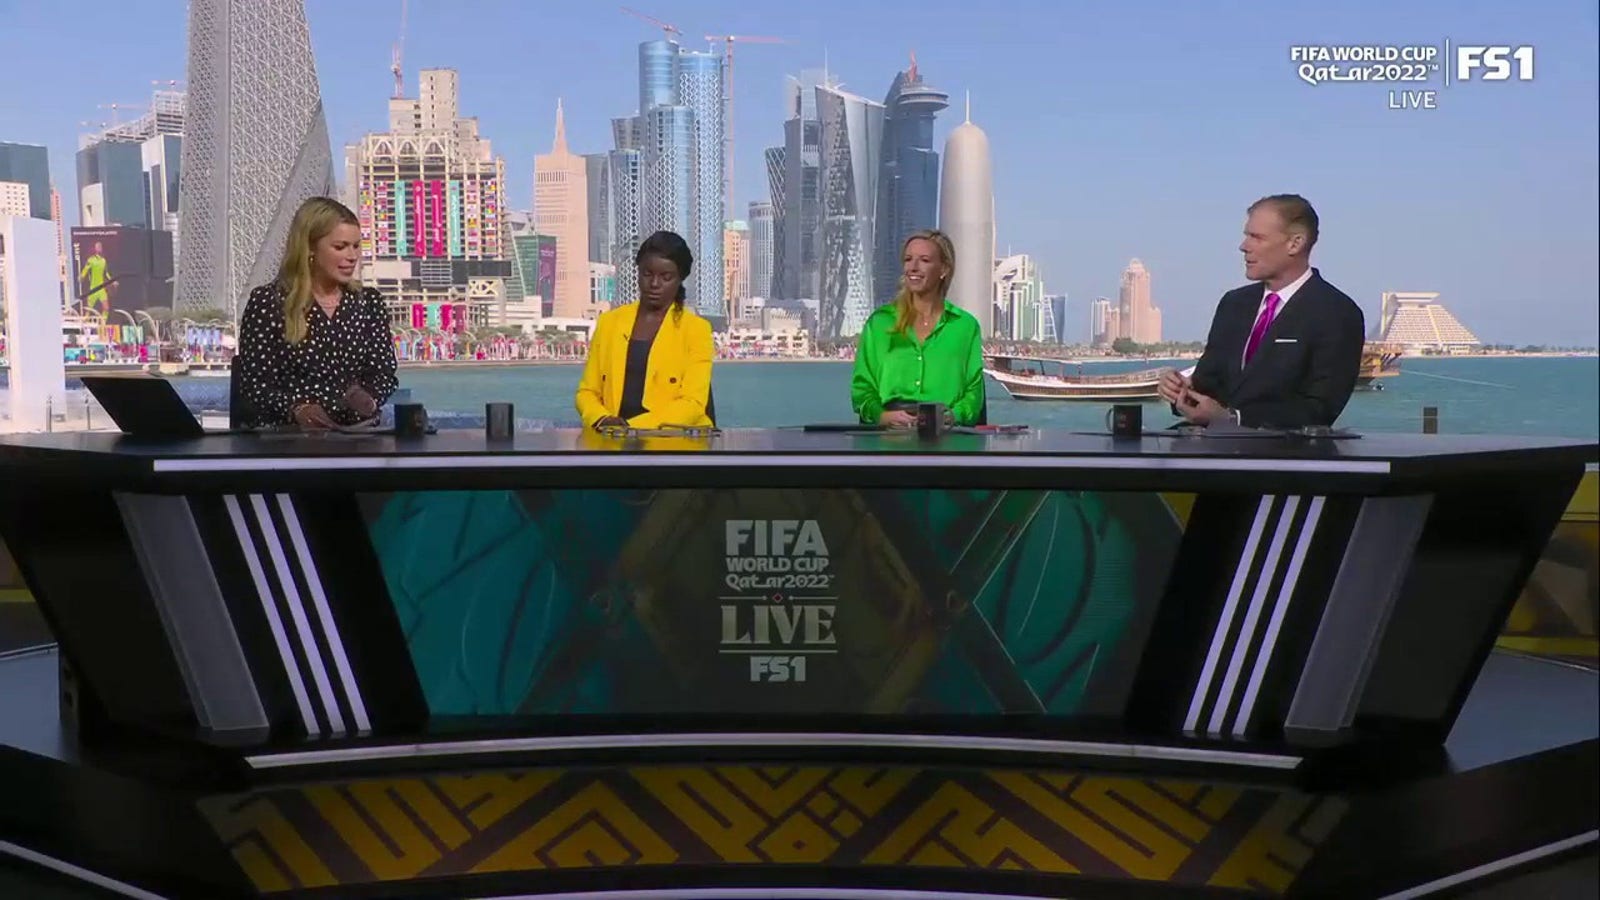 The FIFA World Cup Live crew discuss Lionel Messi's legacy